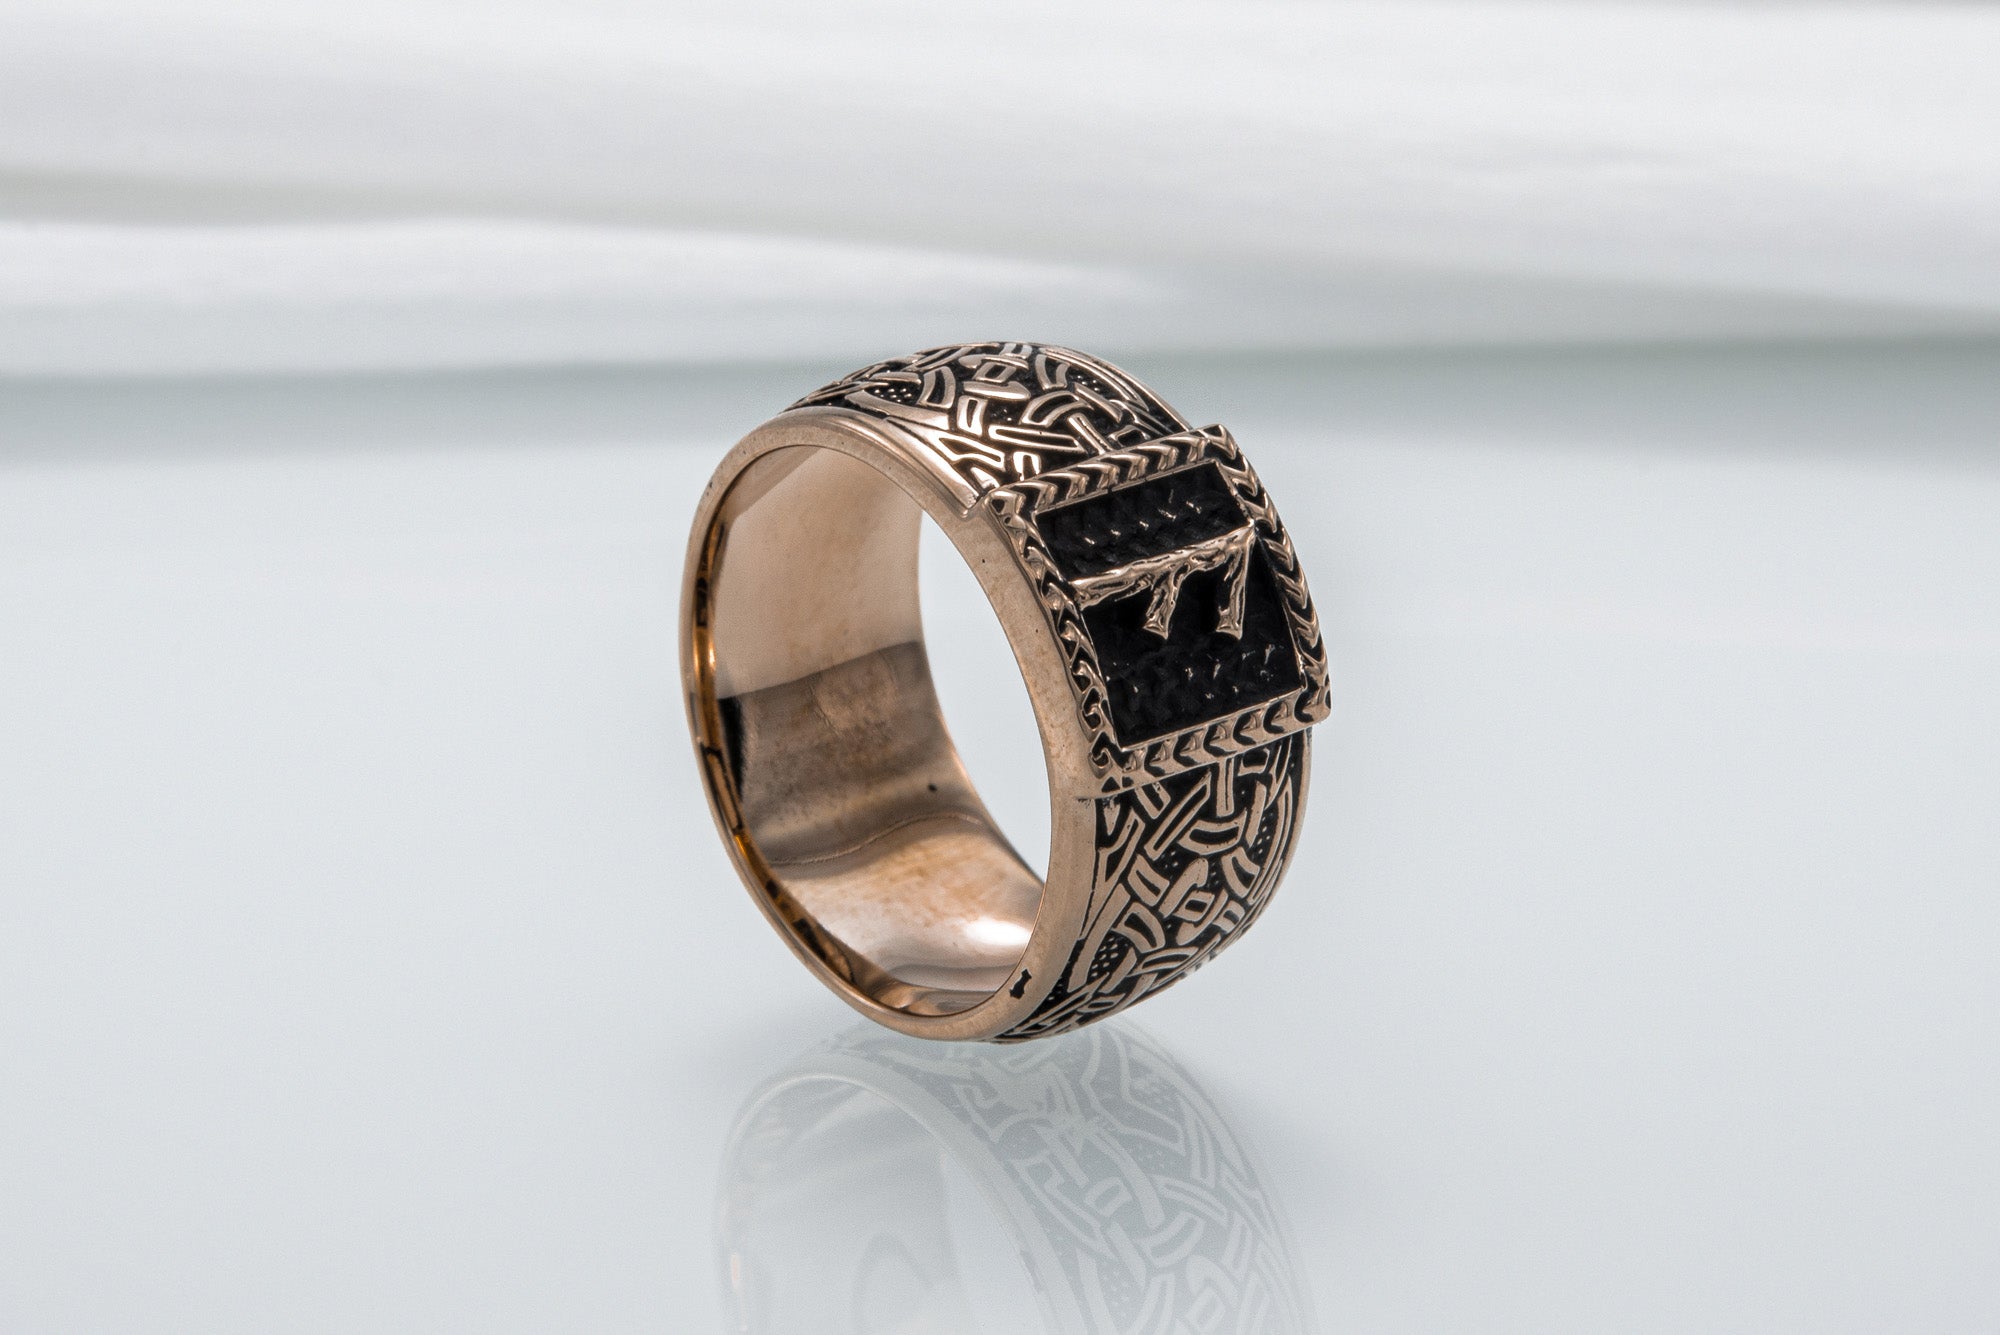 Viking Ring with Ansuz Rune and Norse Ornament Bronze Jewelry - vikingworkshop